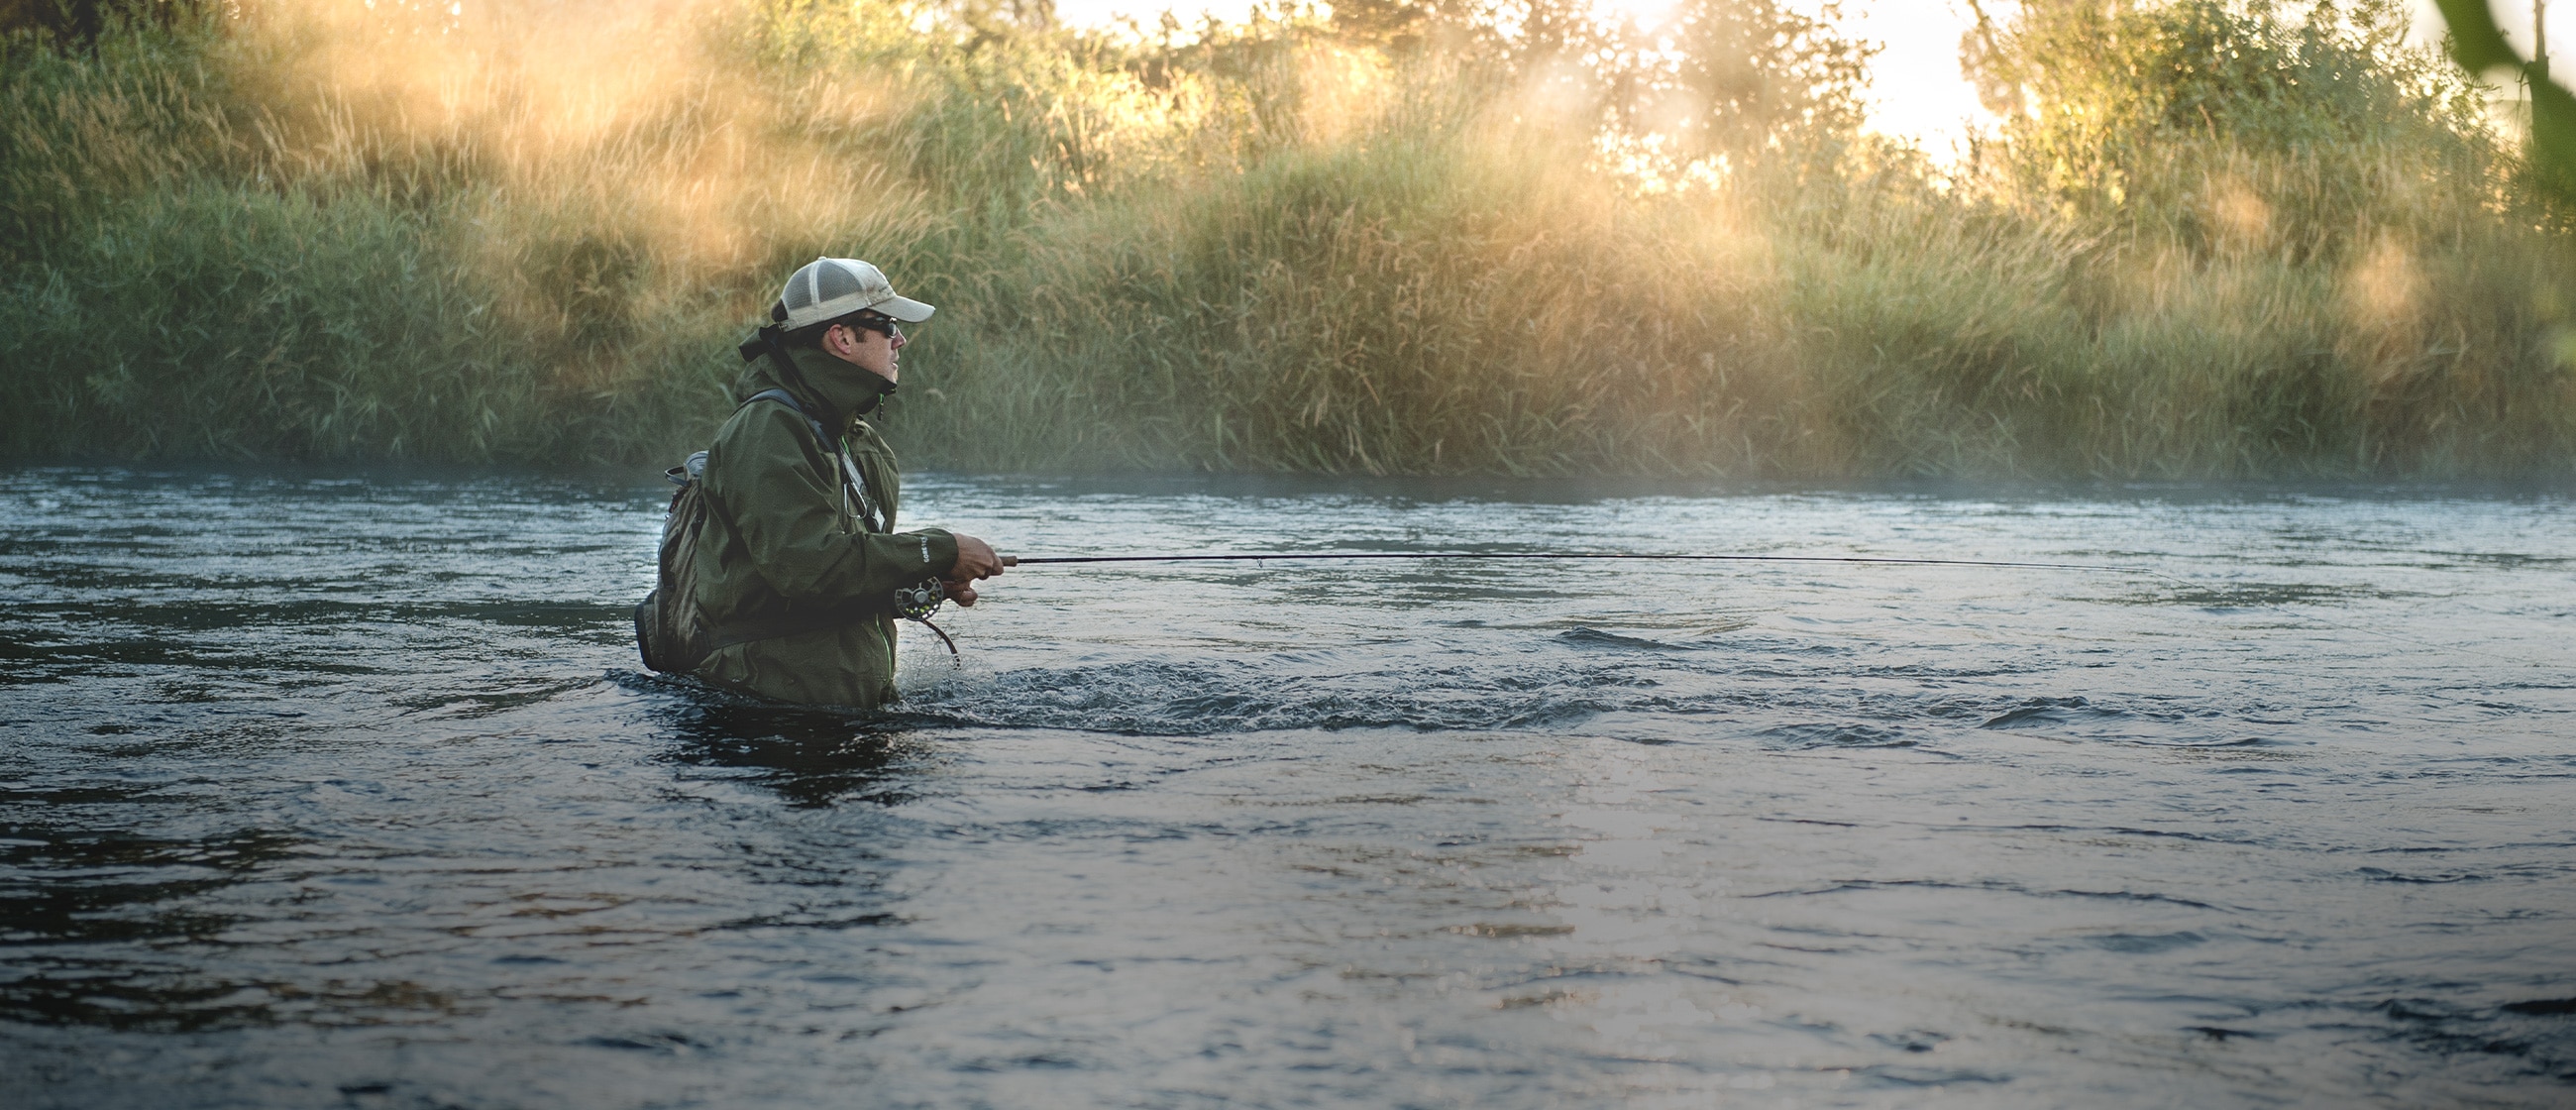 7 Essential Pieces of Fly Fishing Gear for Beginners